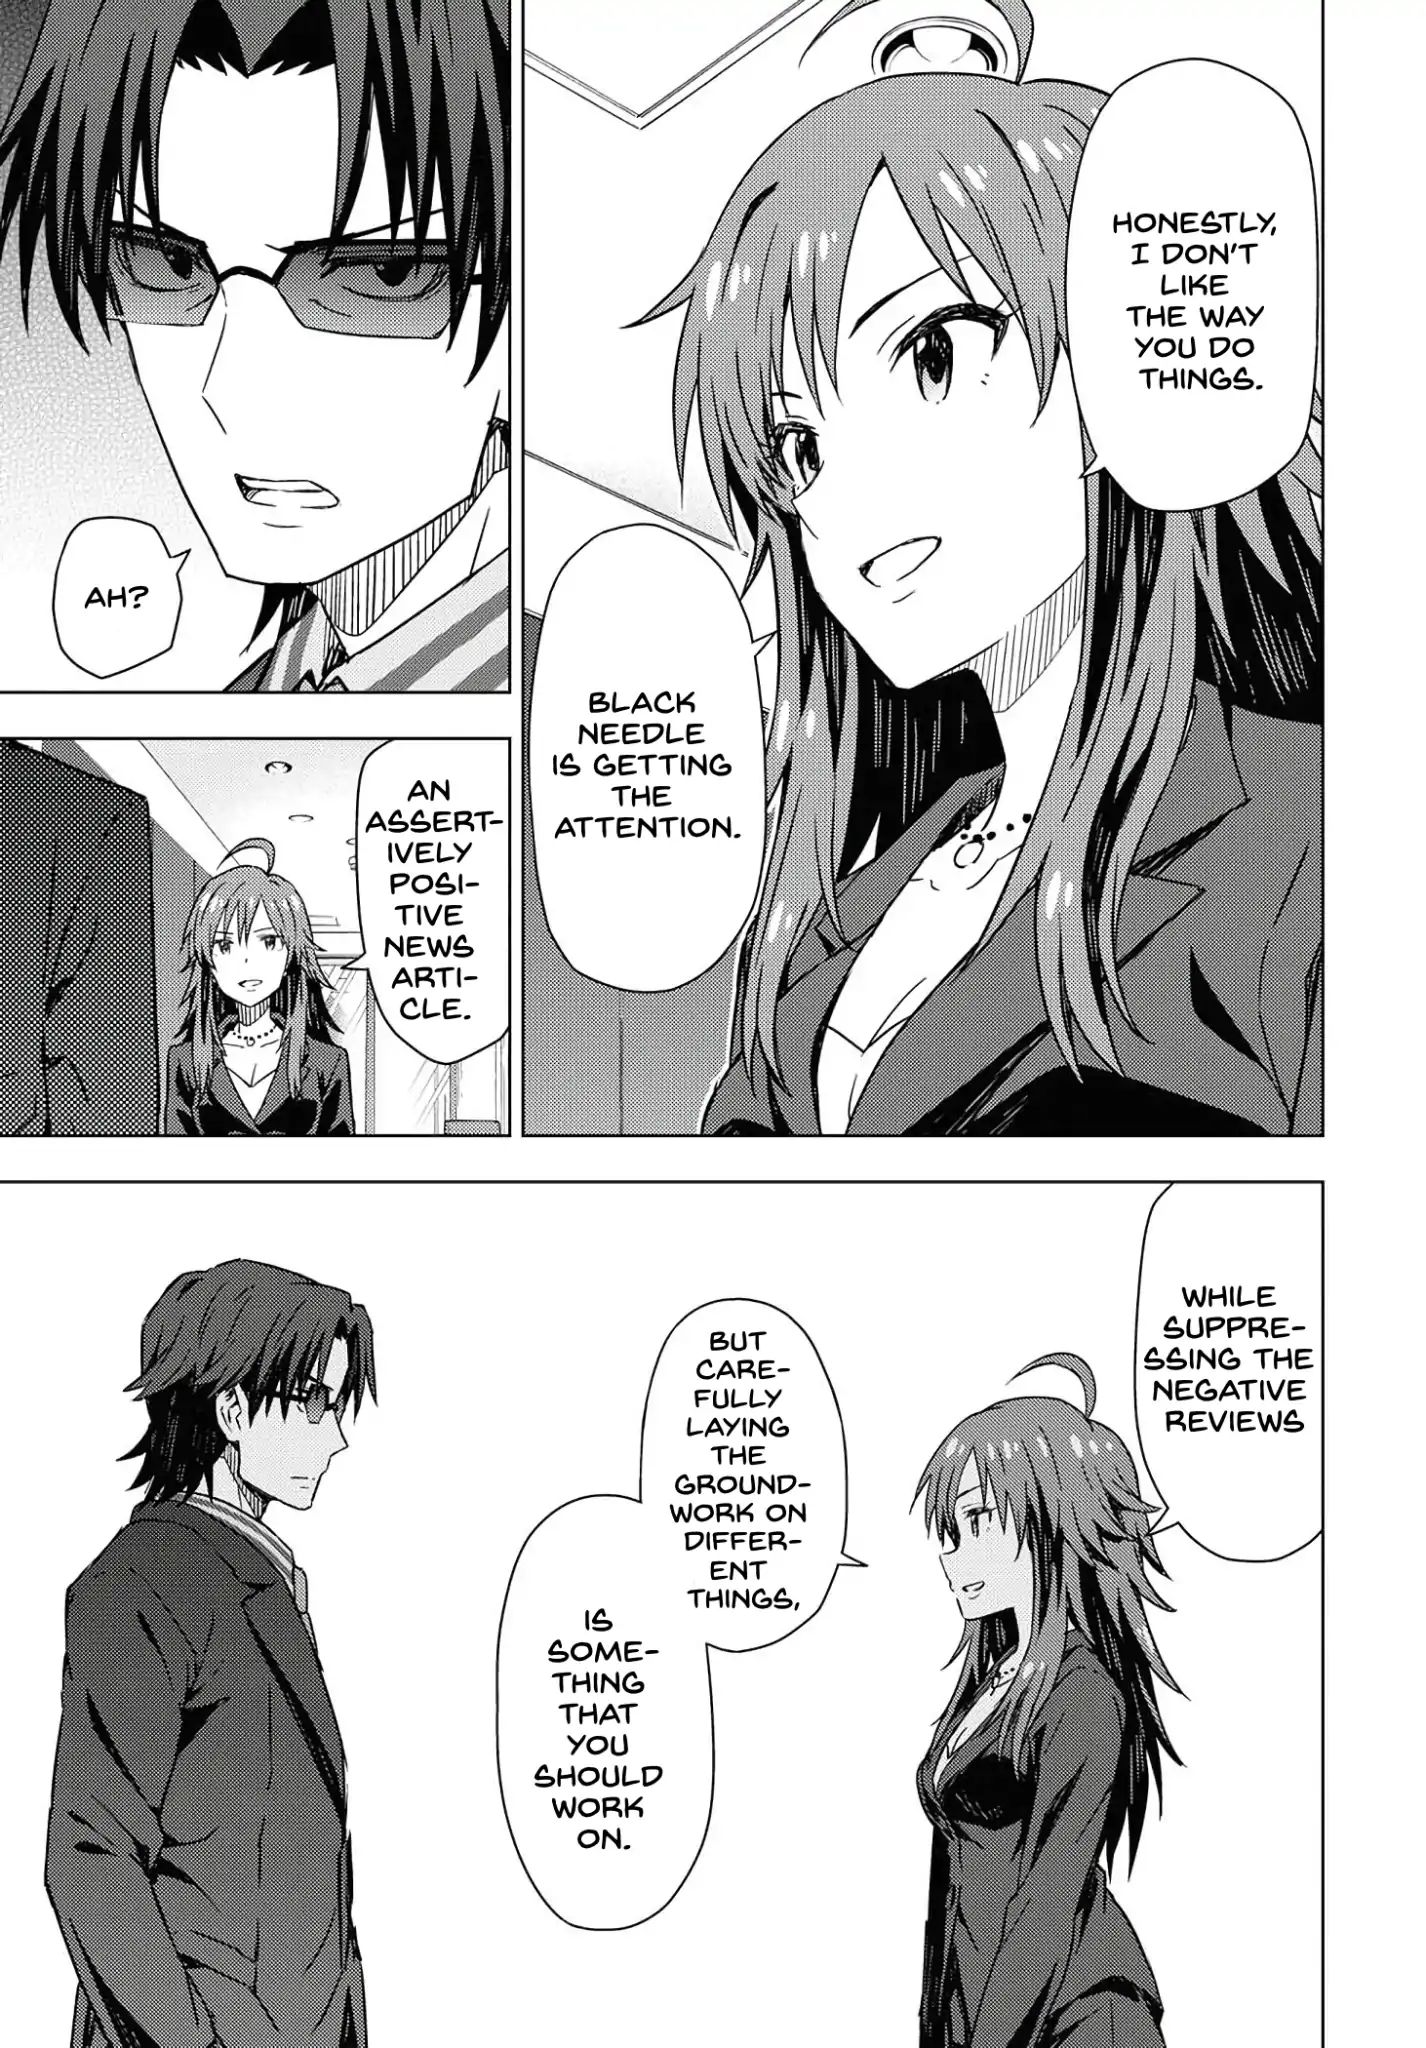 The Idolm@ster: Asayake Wa Koganeiro Vol.1 Chapter 19: Changing For Myself - Picture 3